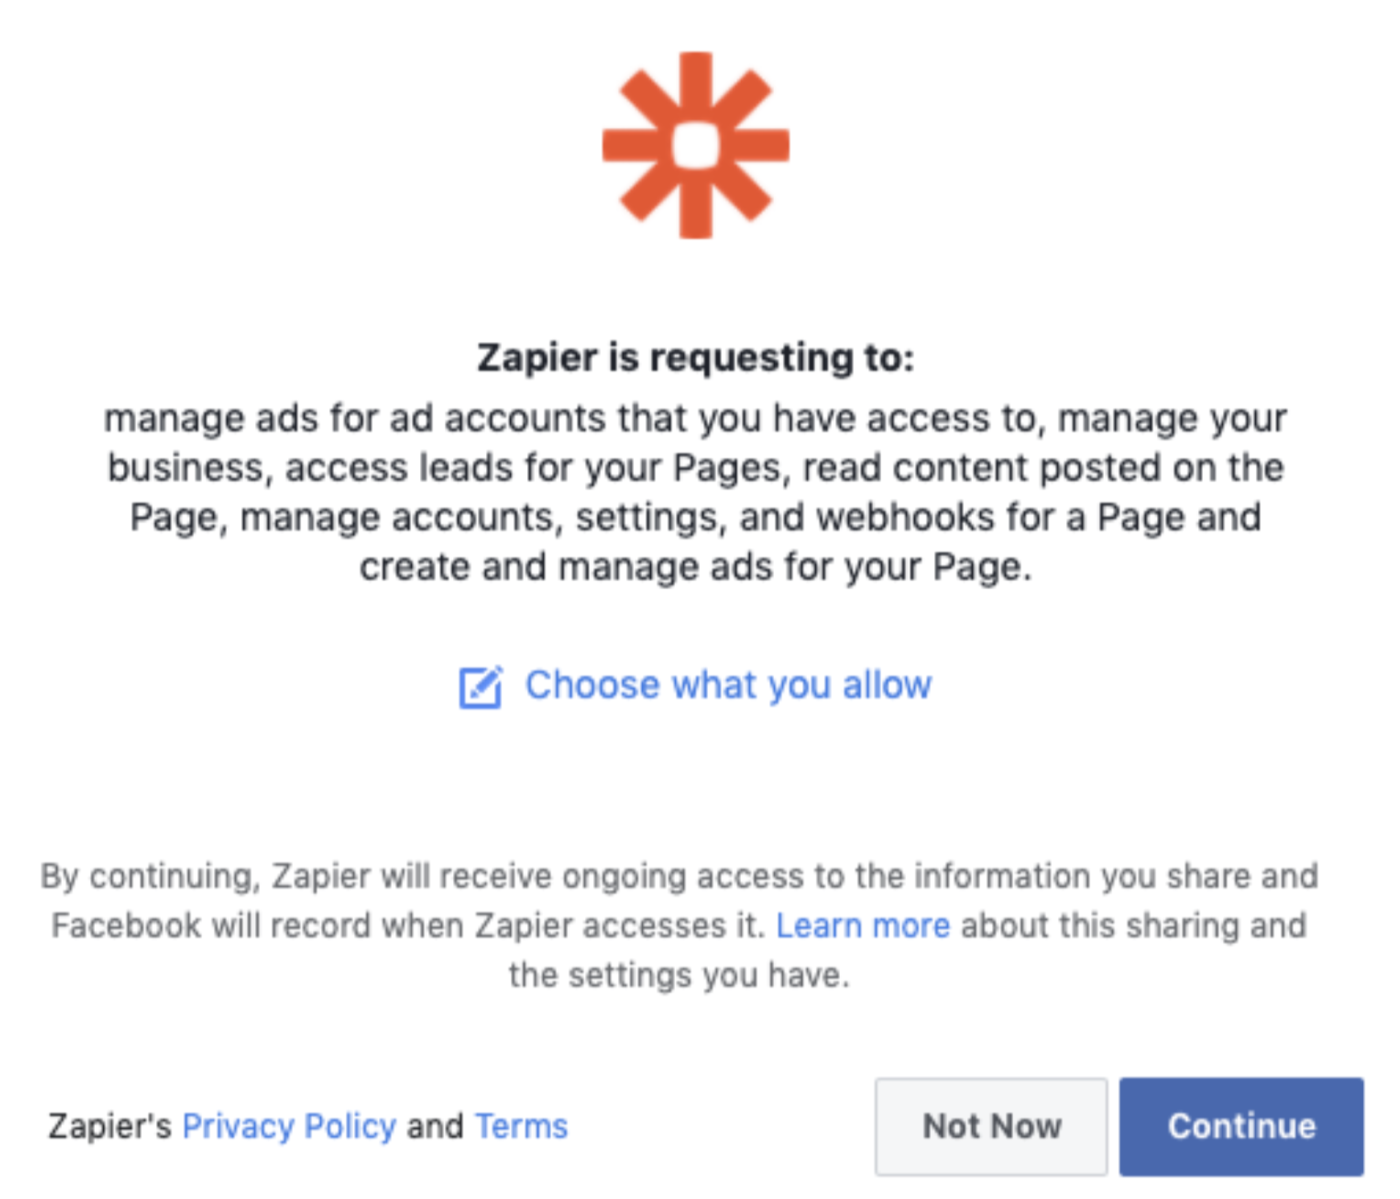 A screenshot outlining Zapier permissions, including managing ad accounts, leads, accounts, seetings, and webhooks, and creating and managing ads for your Page.